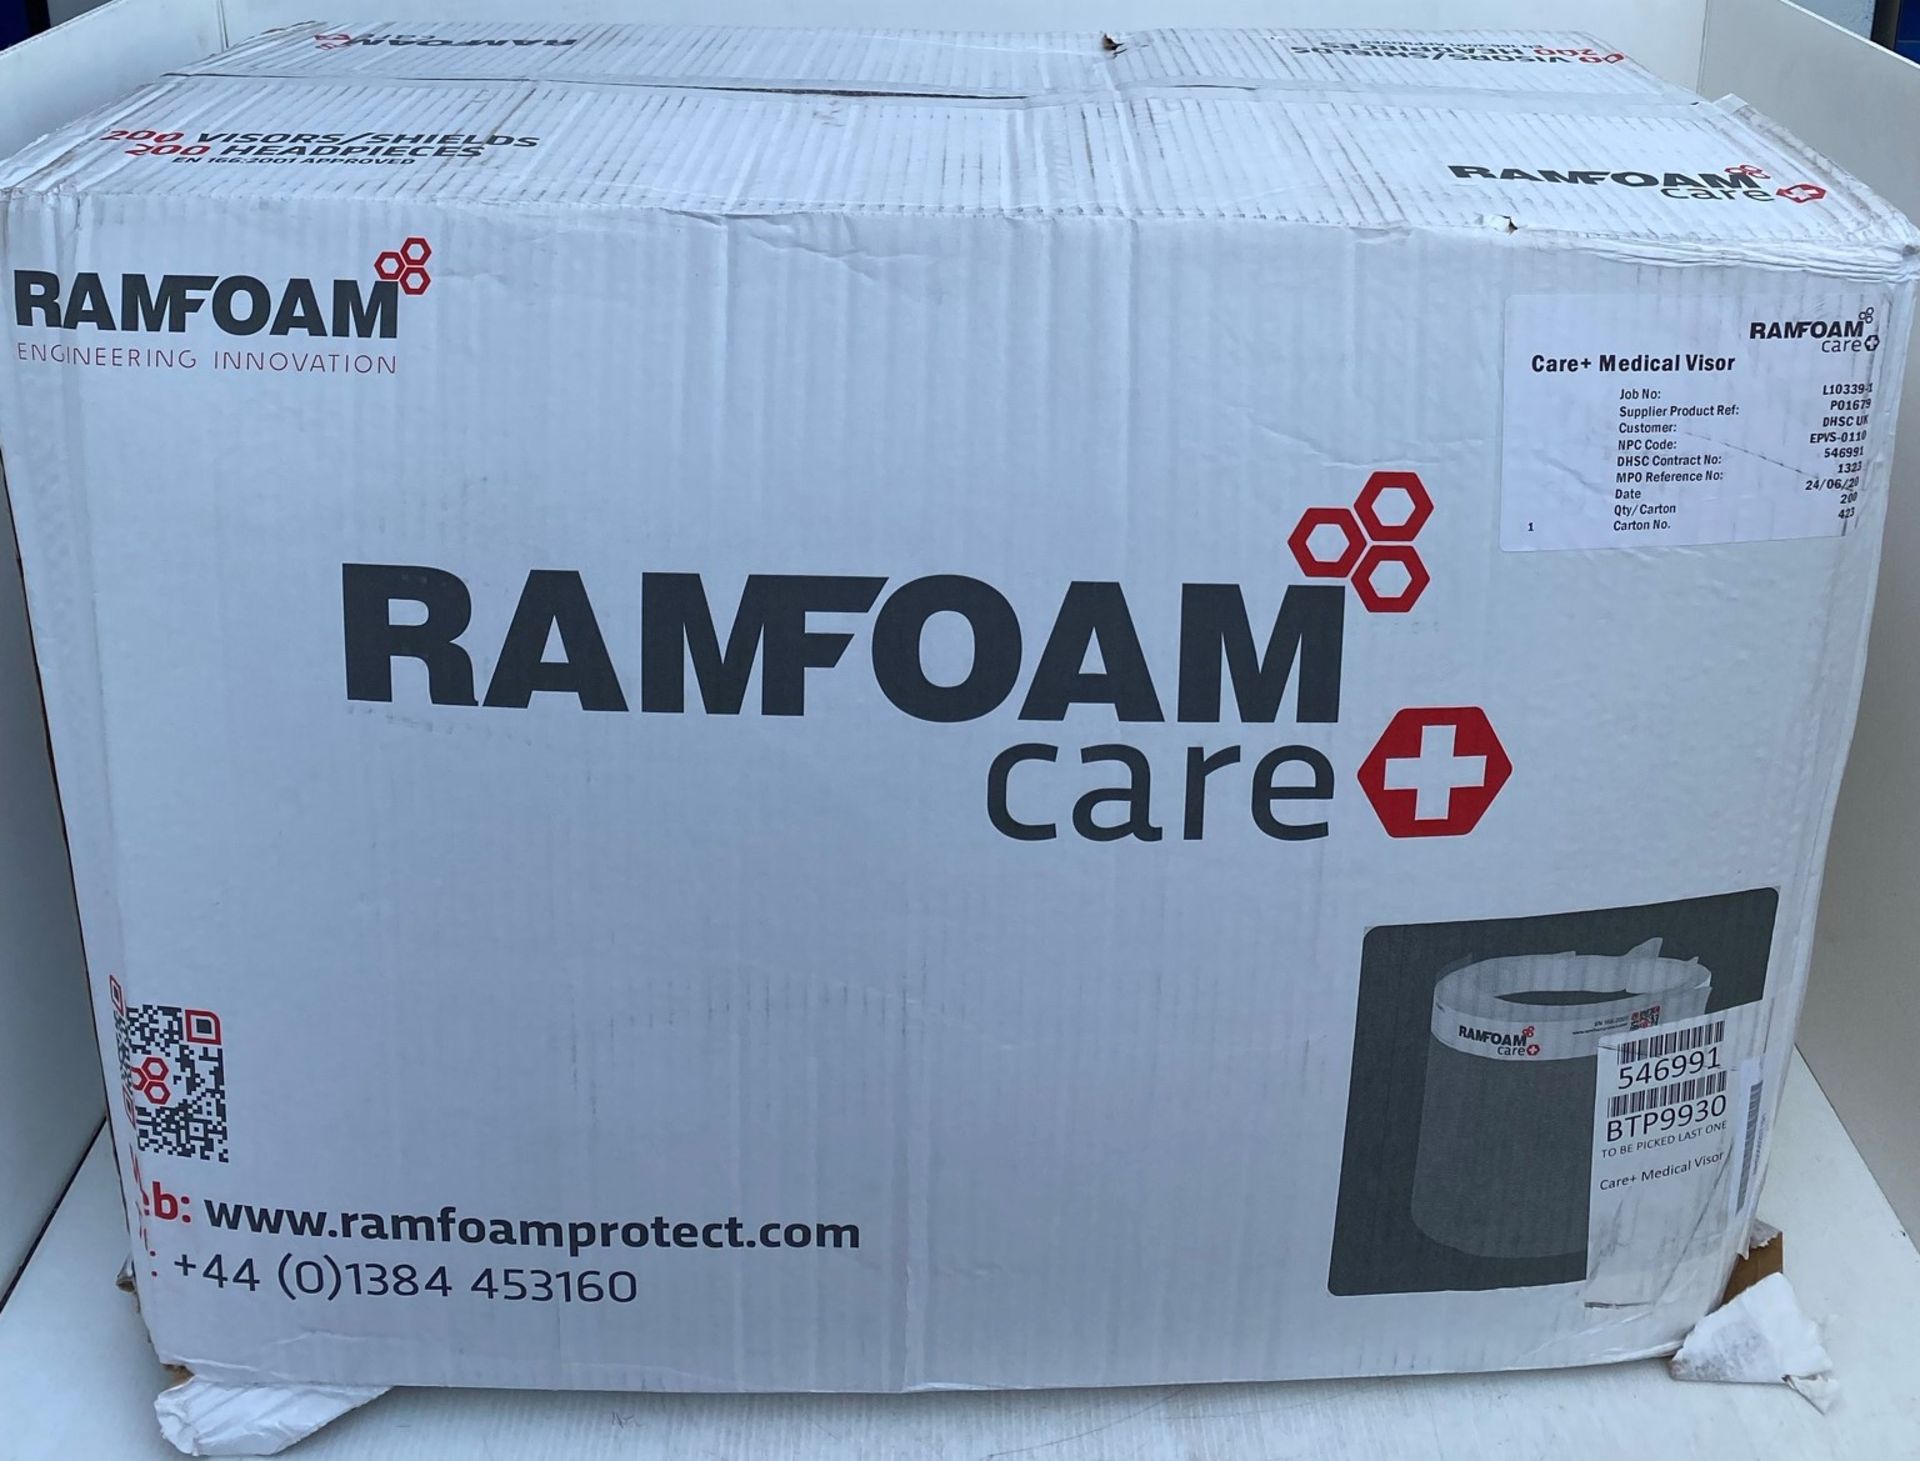 Contents to box 100 x Ramfoam Care+ Medical Visors - Product ref.